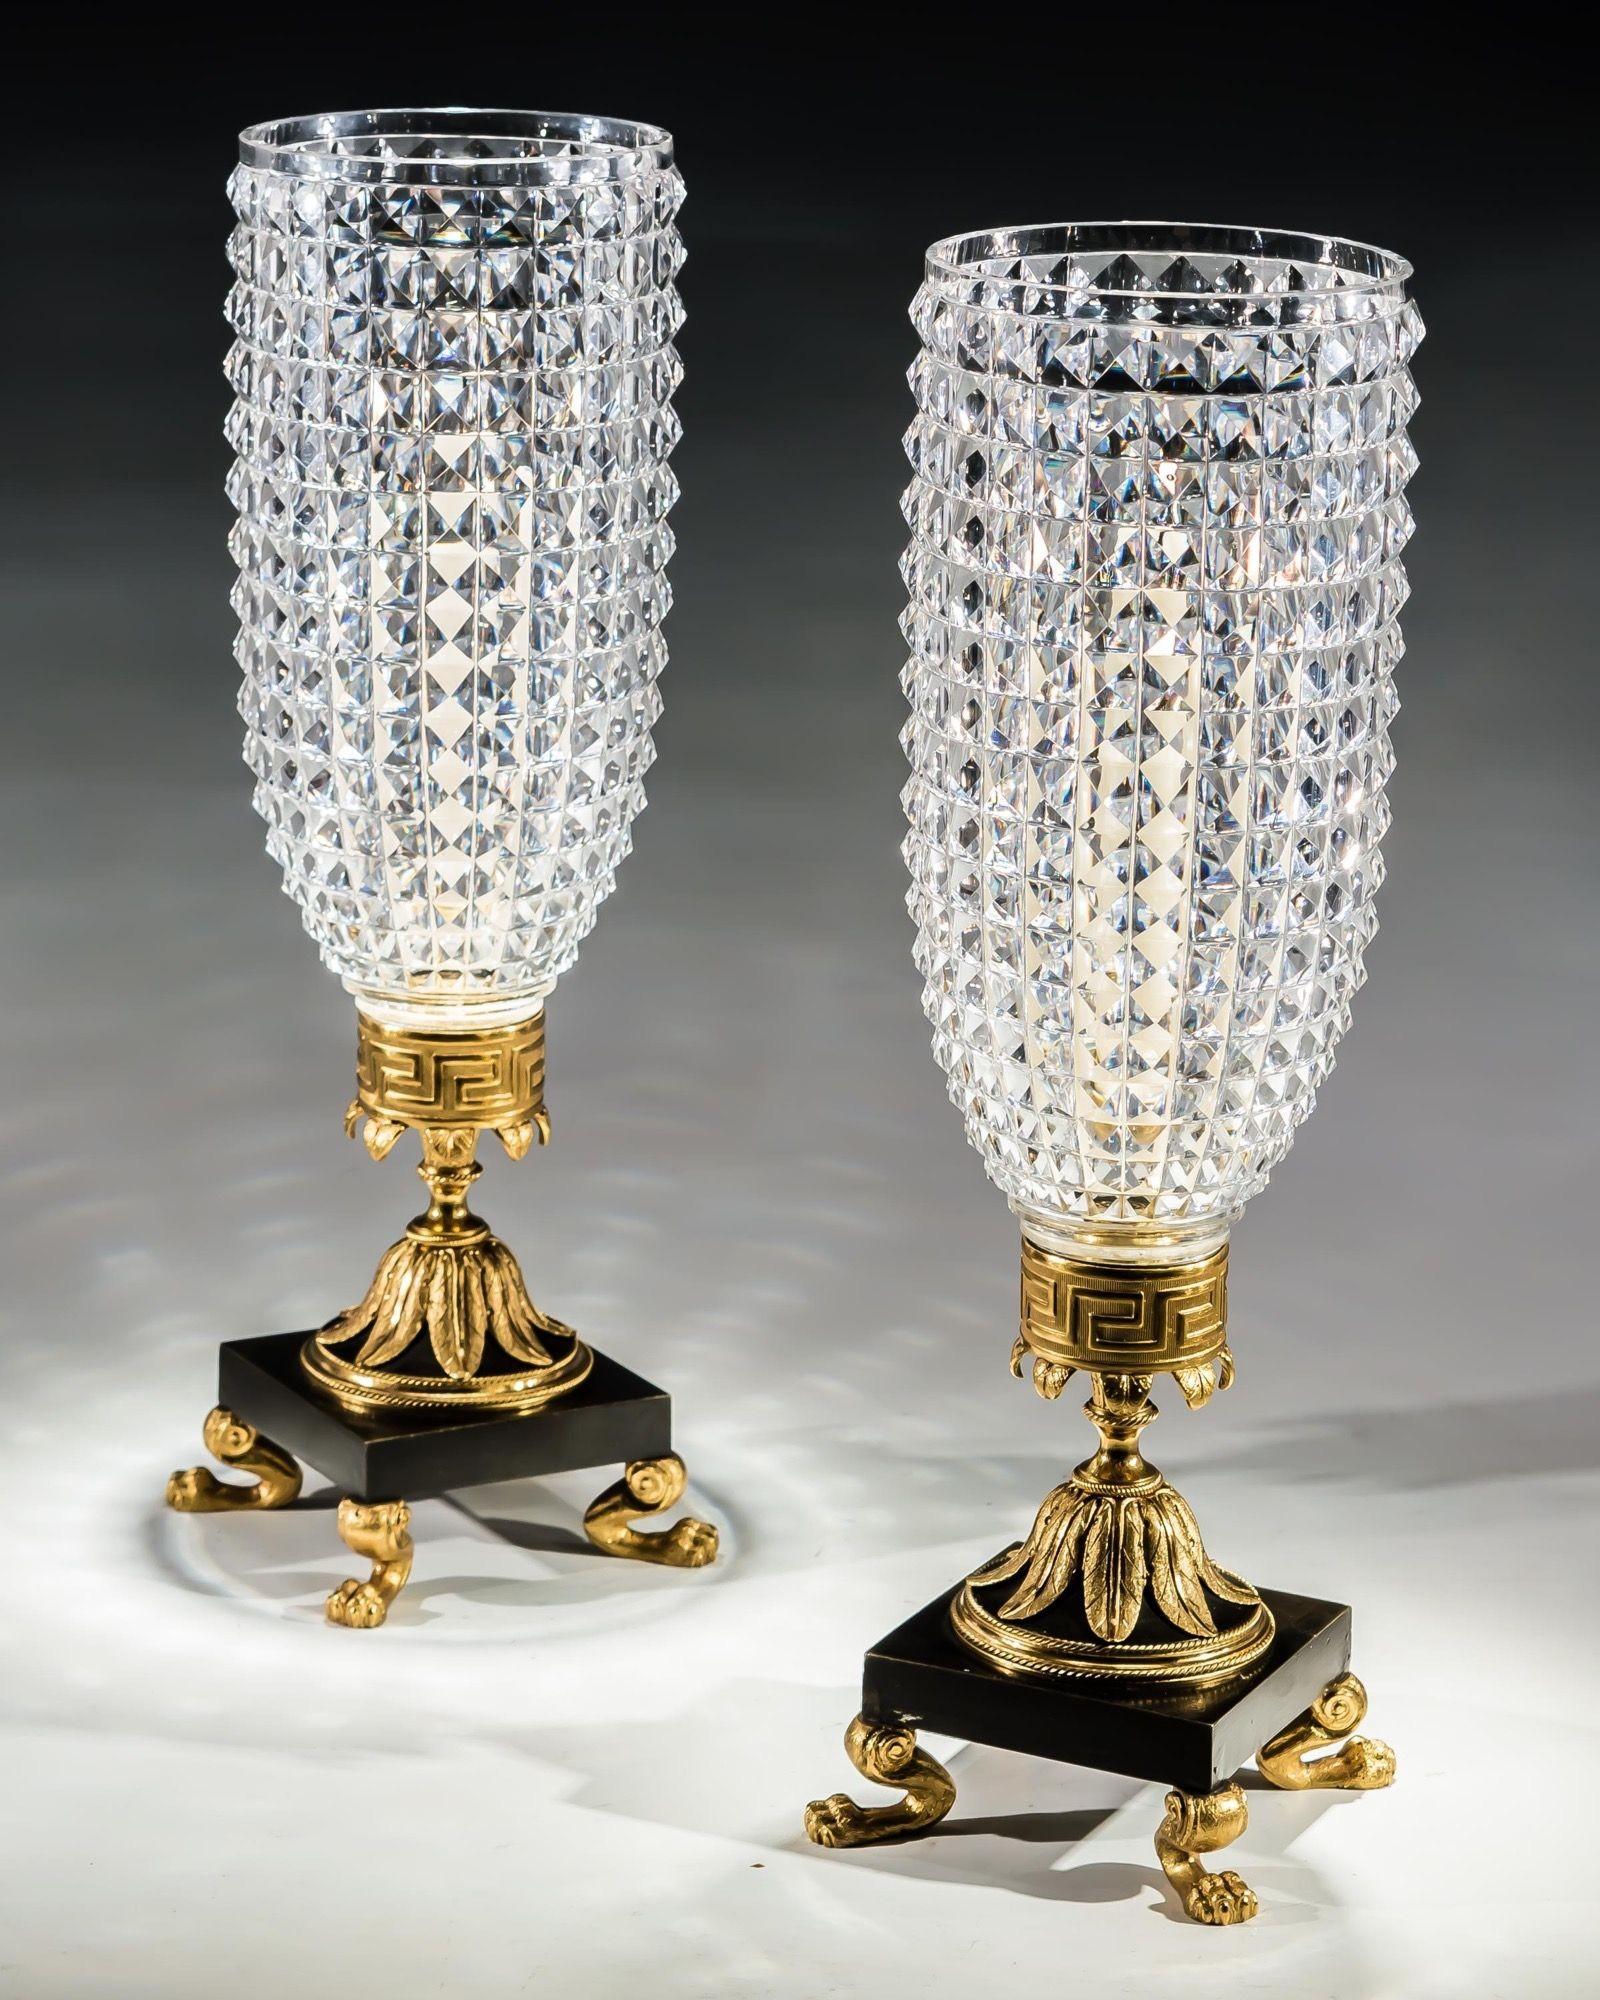 A Pair Of regency Cut Glass Storm Shades On Ormolu & Bronze Bases  In Good Condition For Sale In Steyning, West sussex